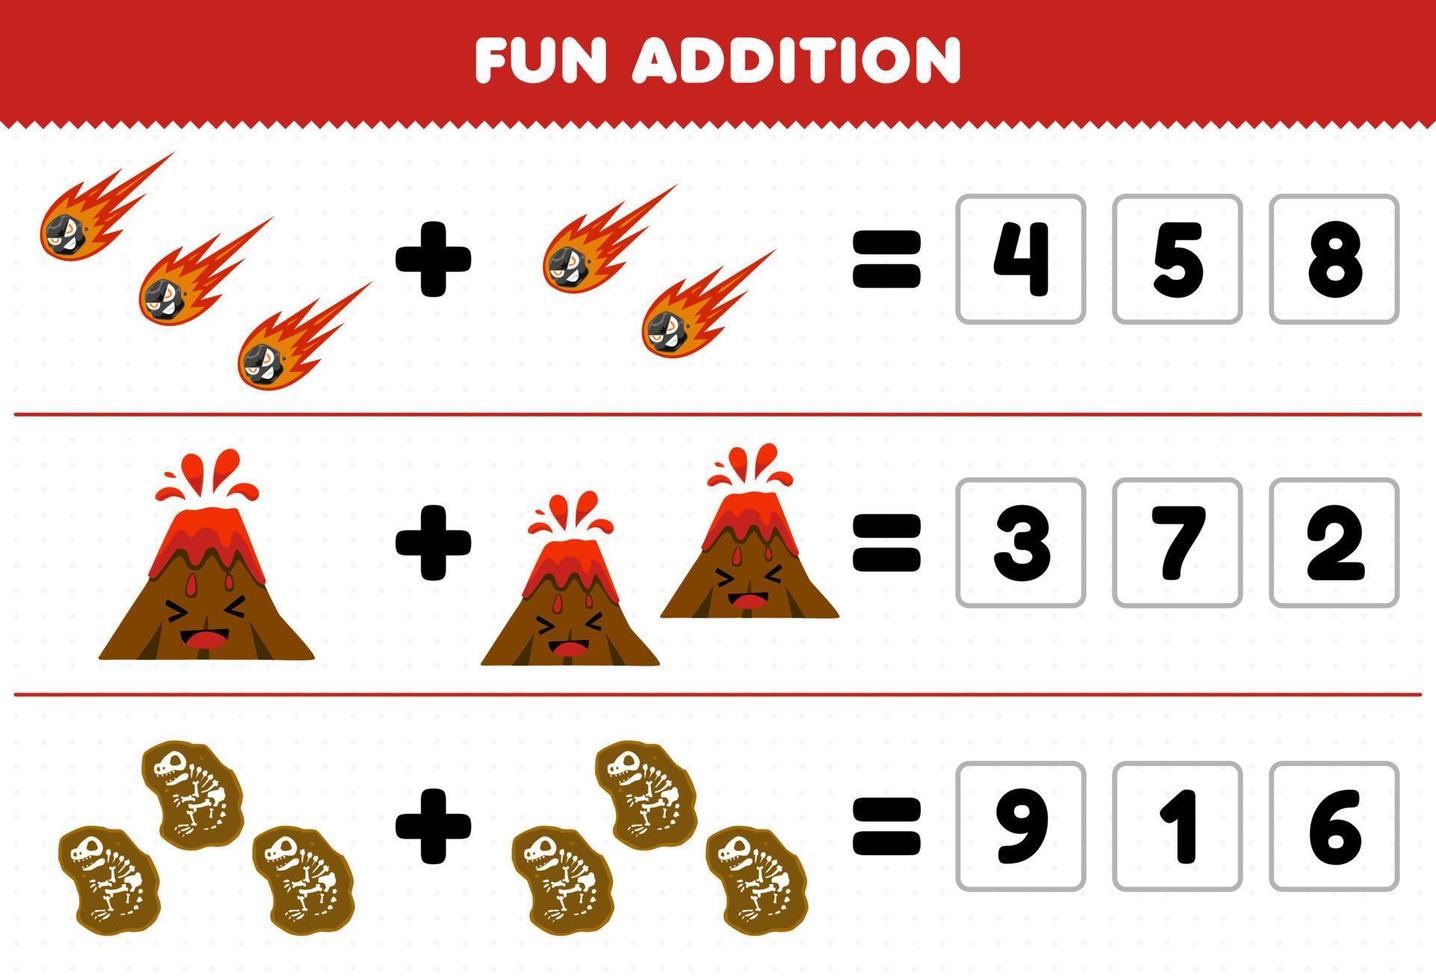 Education game for children fun addition by guess the correct number of cute cartoon meteor volcano fossil printable nature worksheet vector